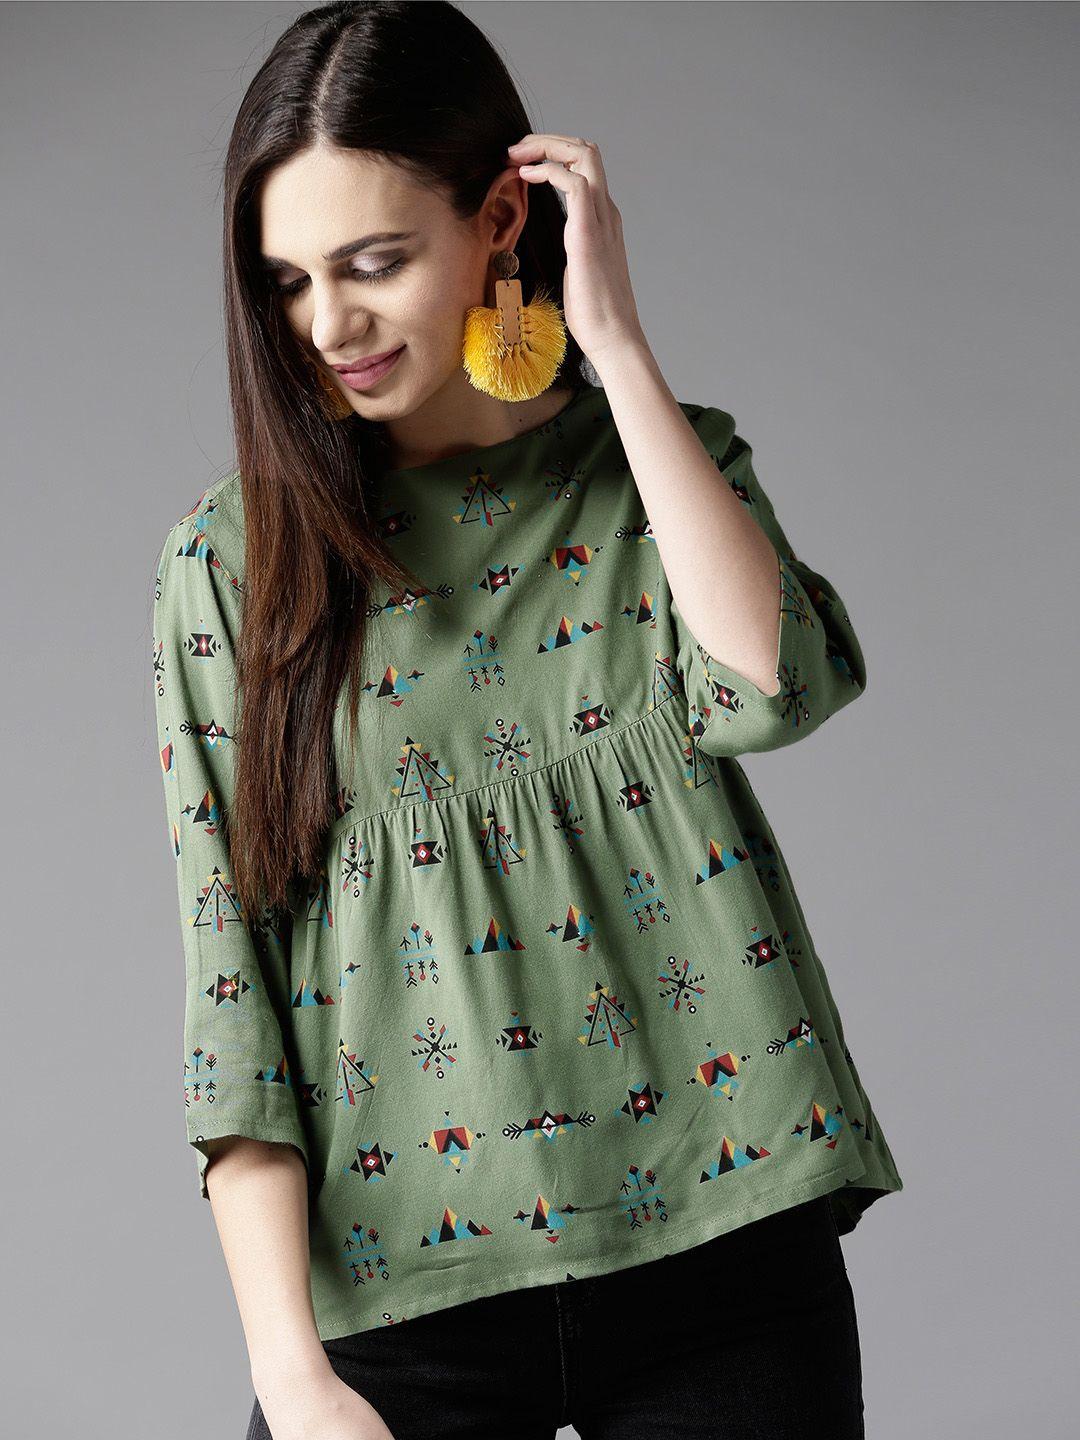 here&now women olive green & blue printed a-line top with gathered detail